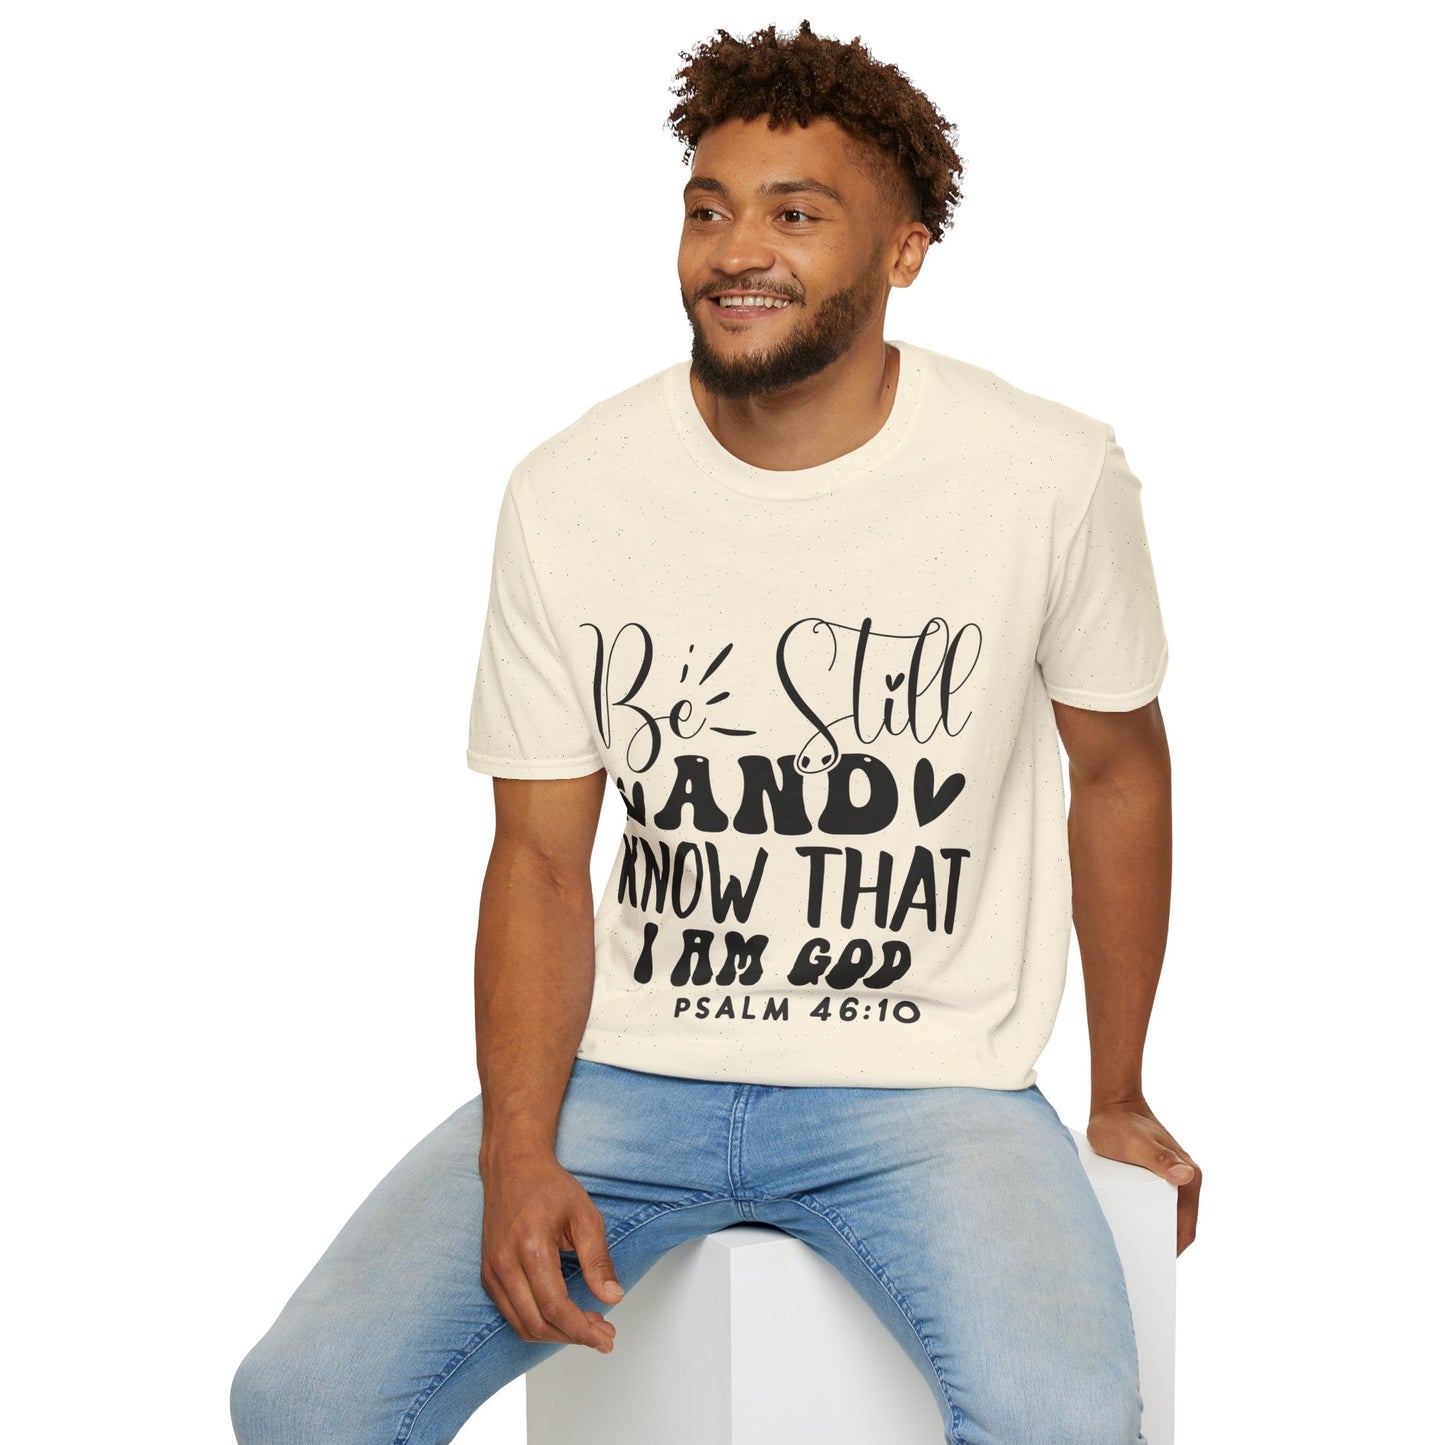 Be Still, And Know That I Am God Psaml 46:10 Triple Viking T-Shirt